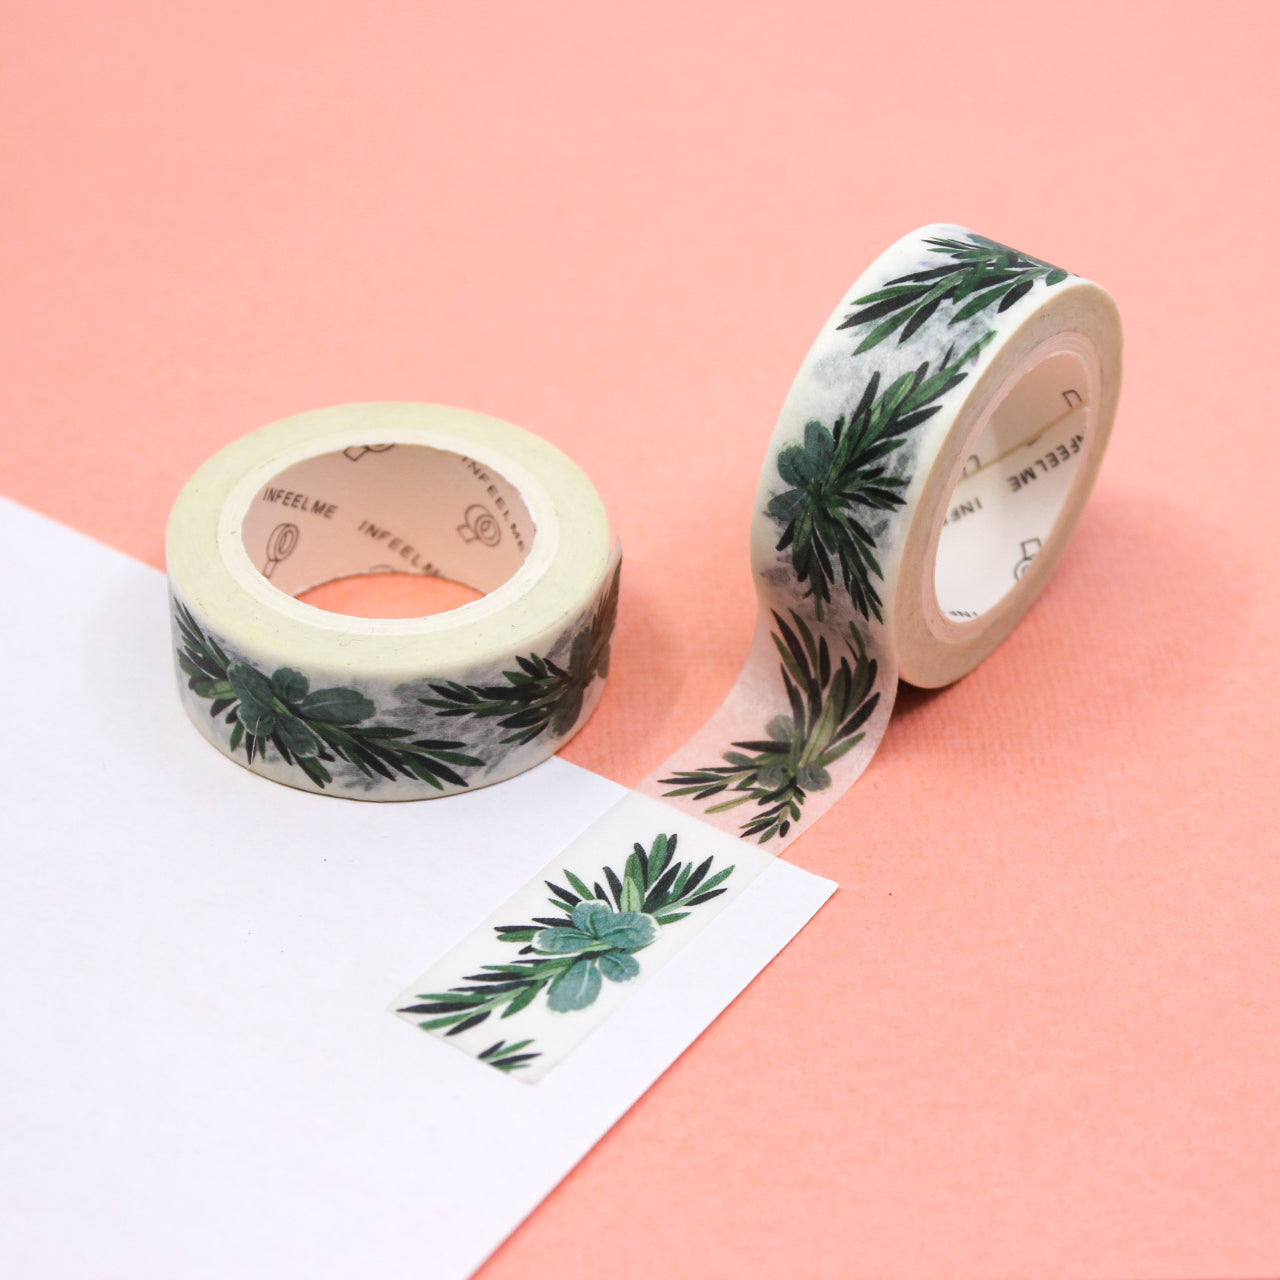 Enhance your crafts with our Greenery Laurel Bouquet Washi Tape, adorned with a lush bouquet of laurel leaves. Ideal for adding a touch of natural elegance to your projects. This tape is sold at BBB Supplies Craft Shop.